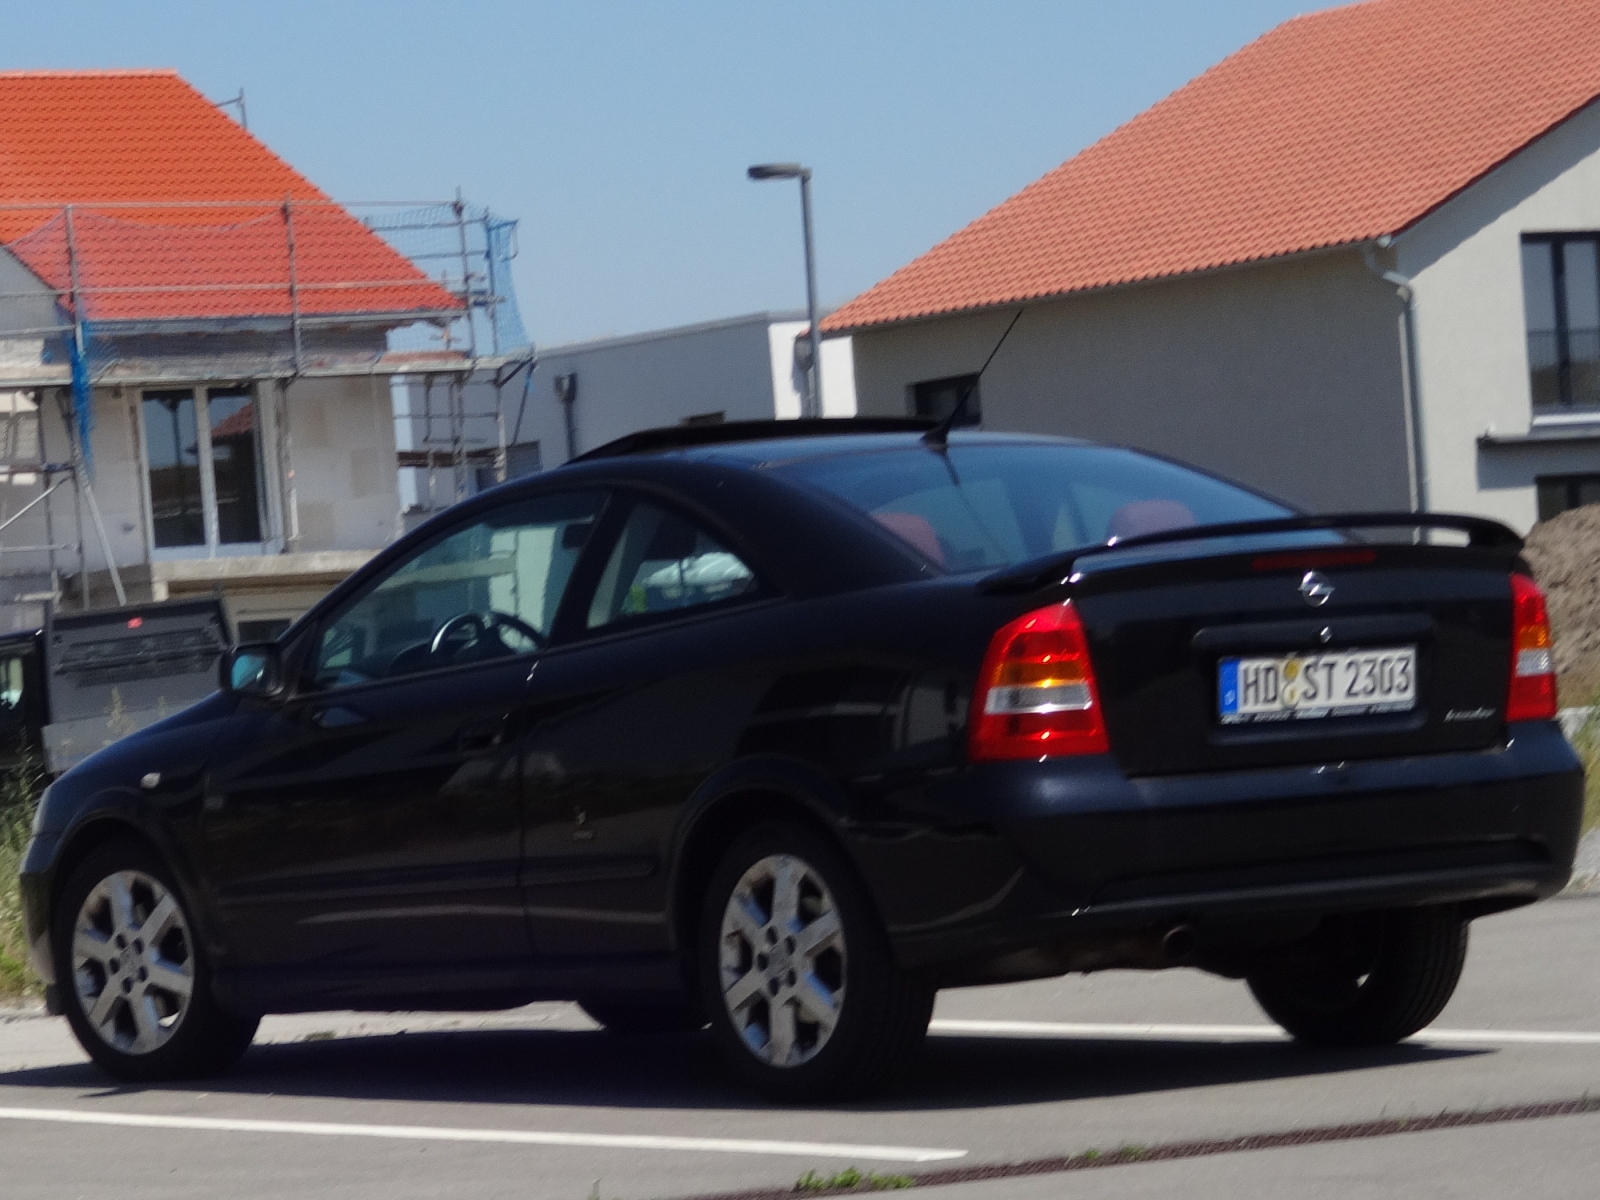 Opel Astra G Coup